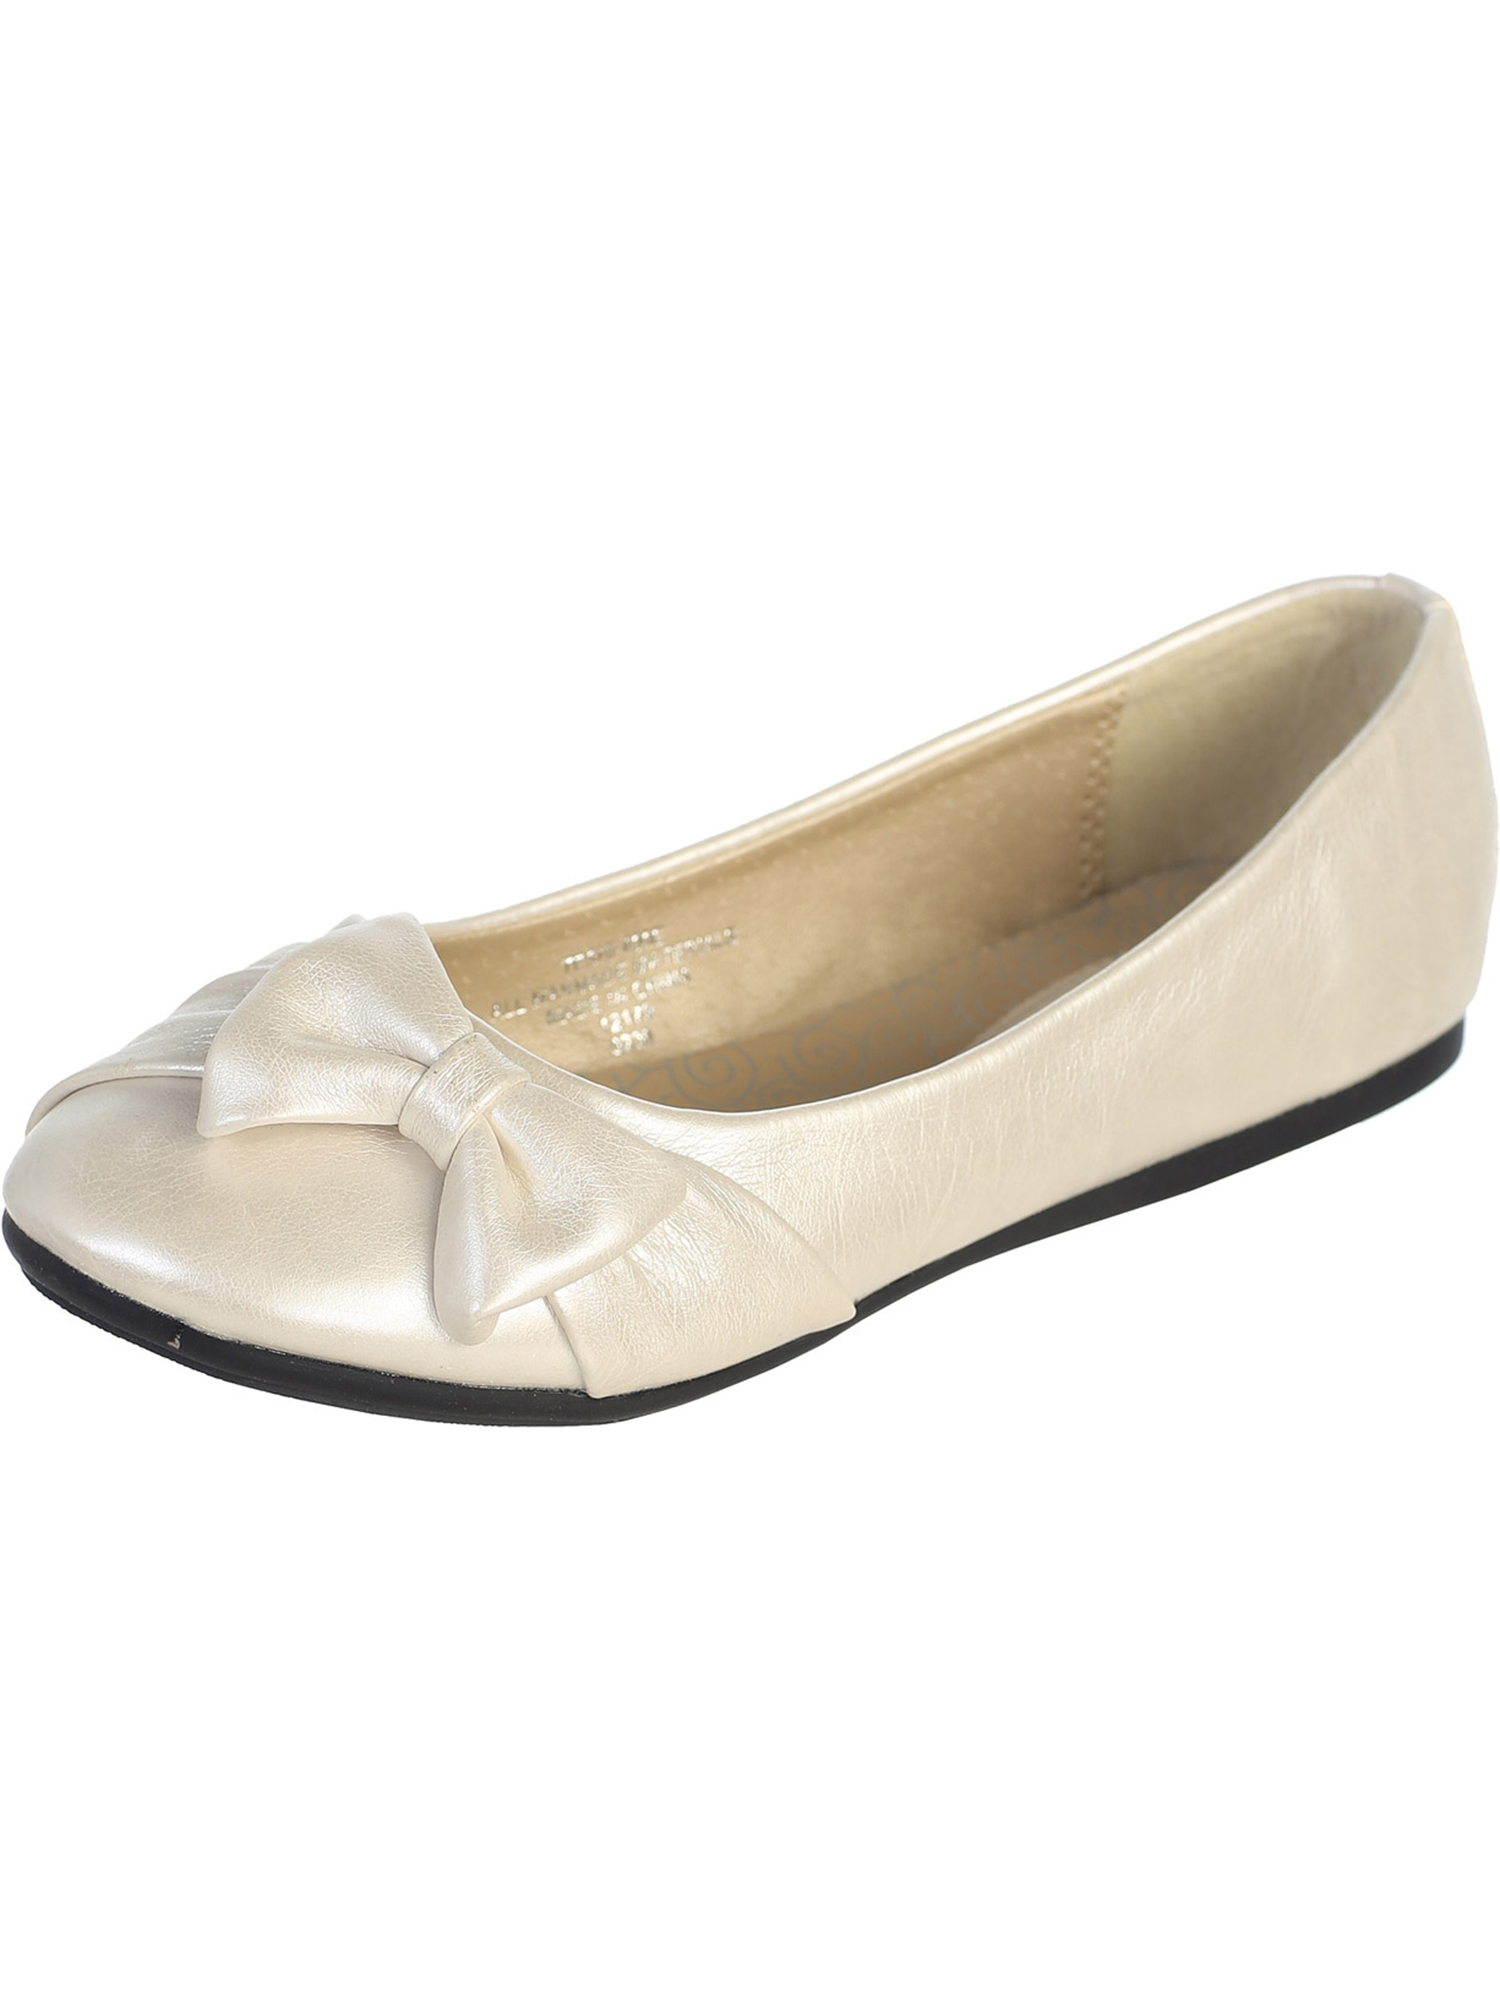 Ivory Pearl Girl's Flat Shoes with Side Bow Girl 13